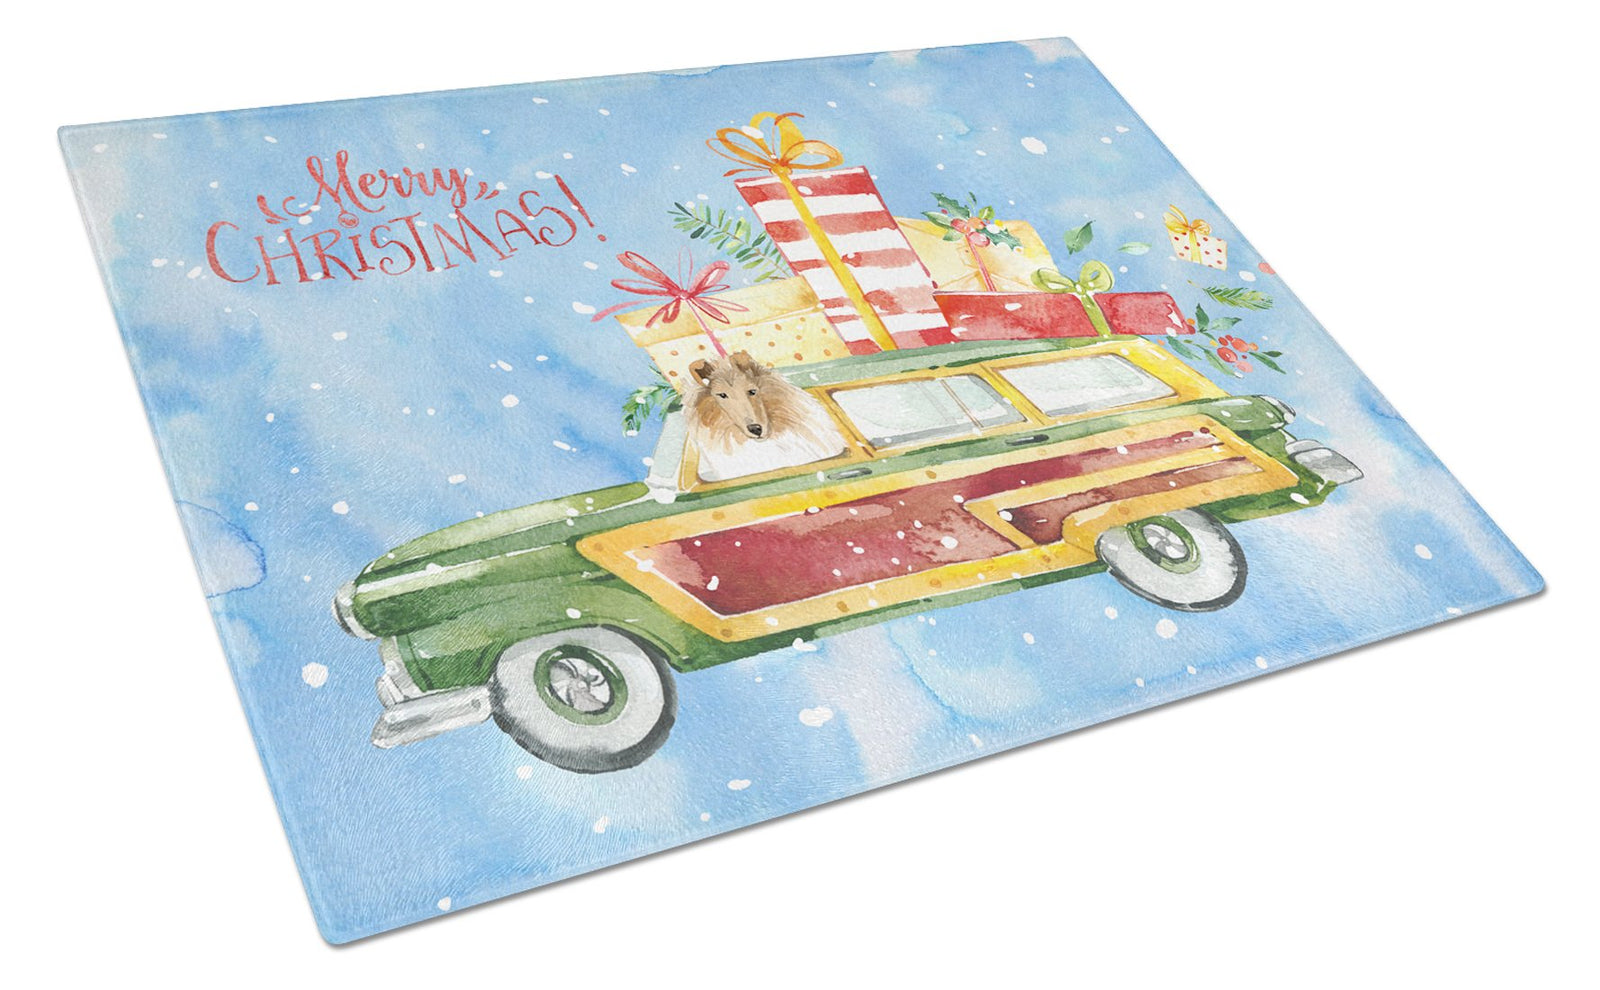 Merry Christmas Collie Glass Cutting Board Large CK2418LCB by Caroline's Treasures